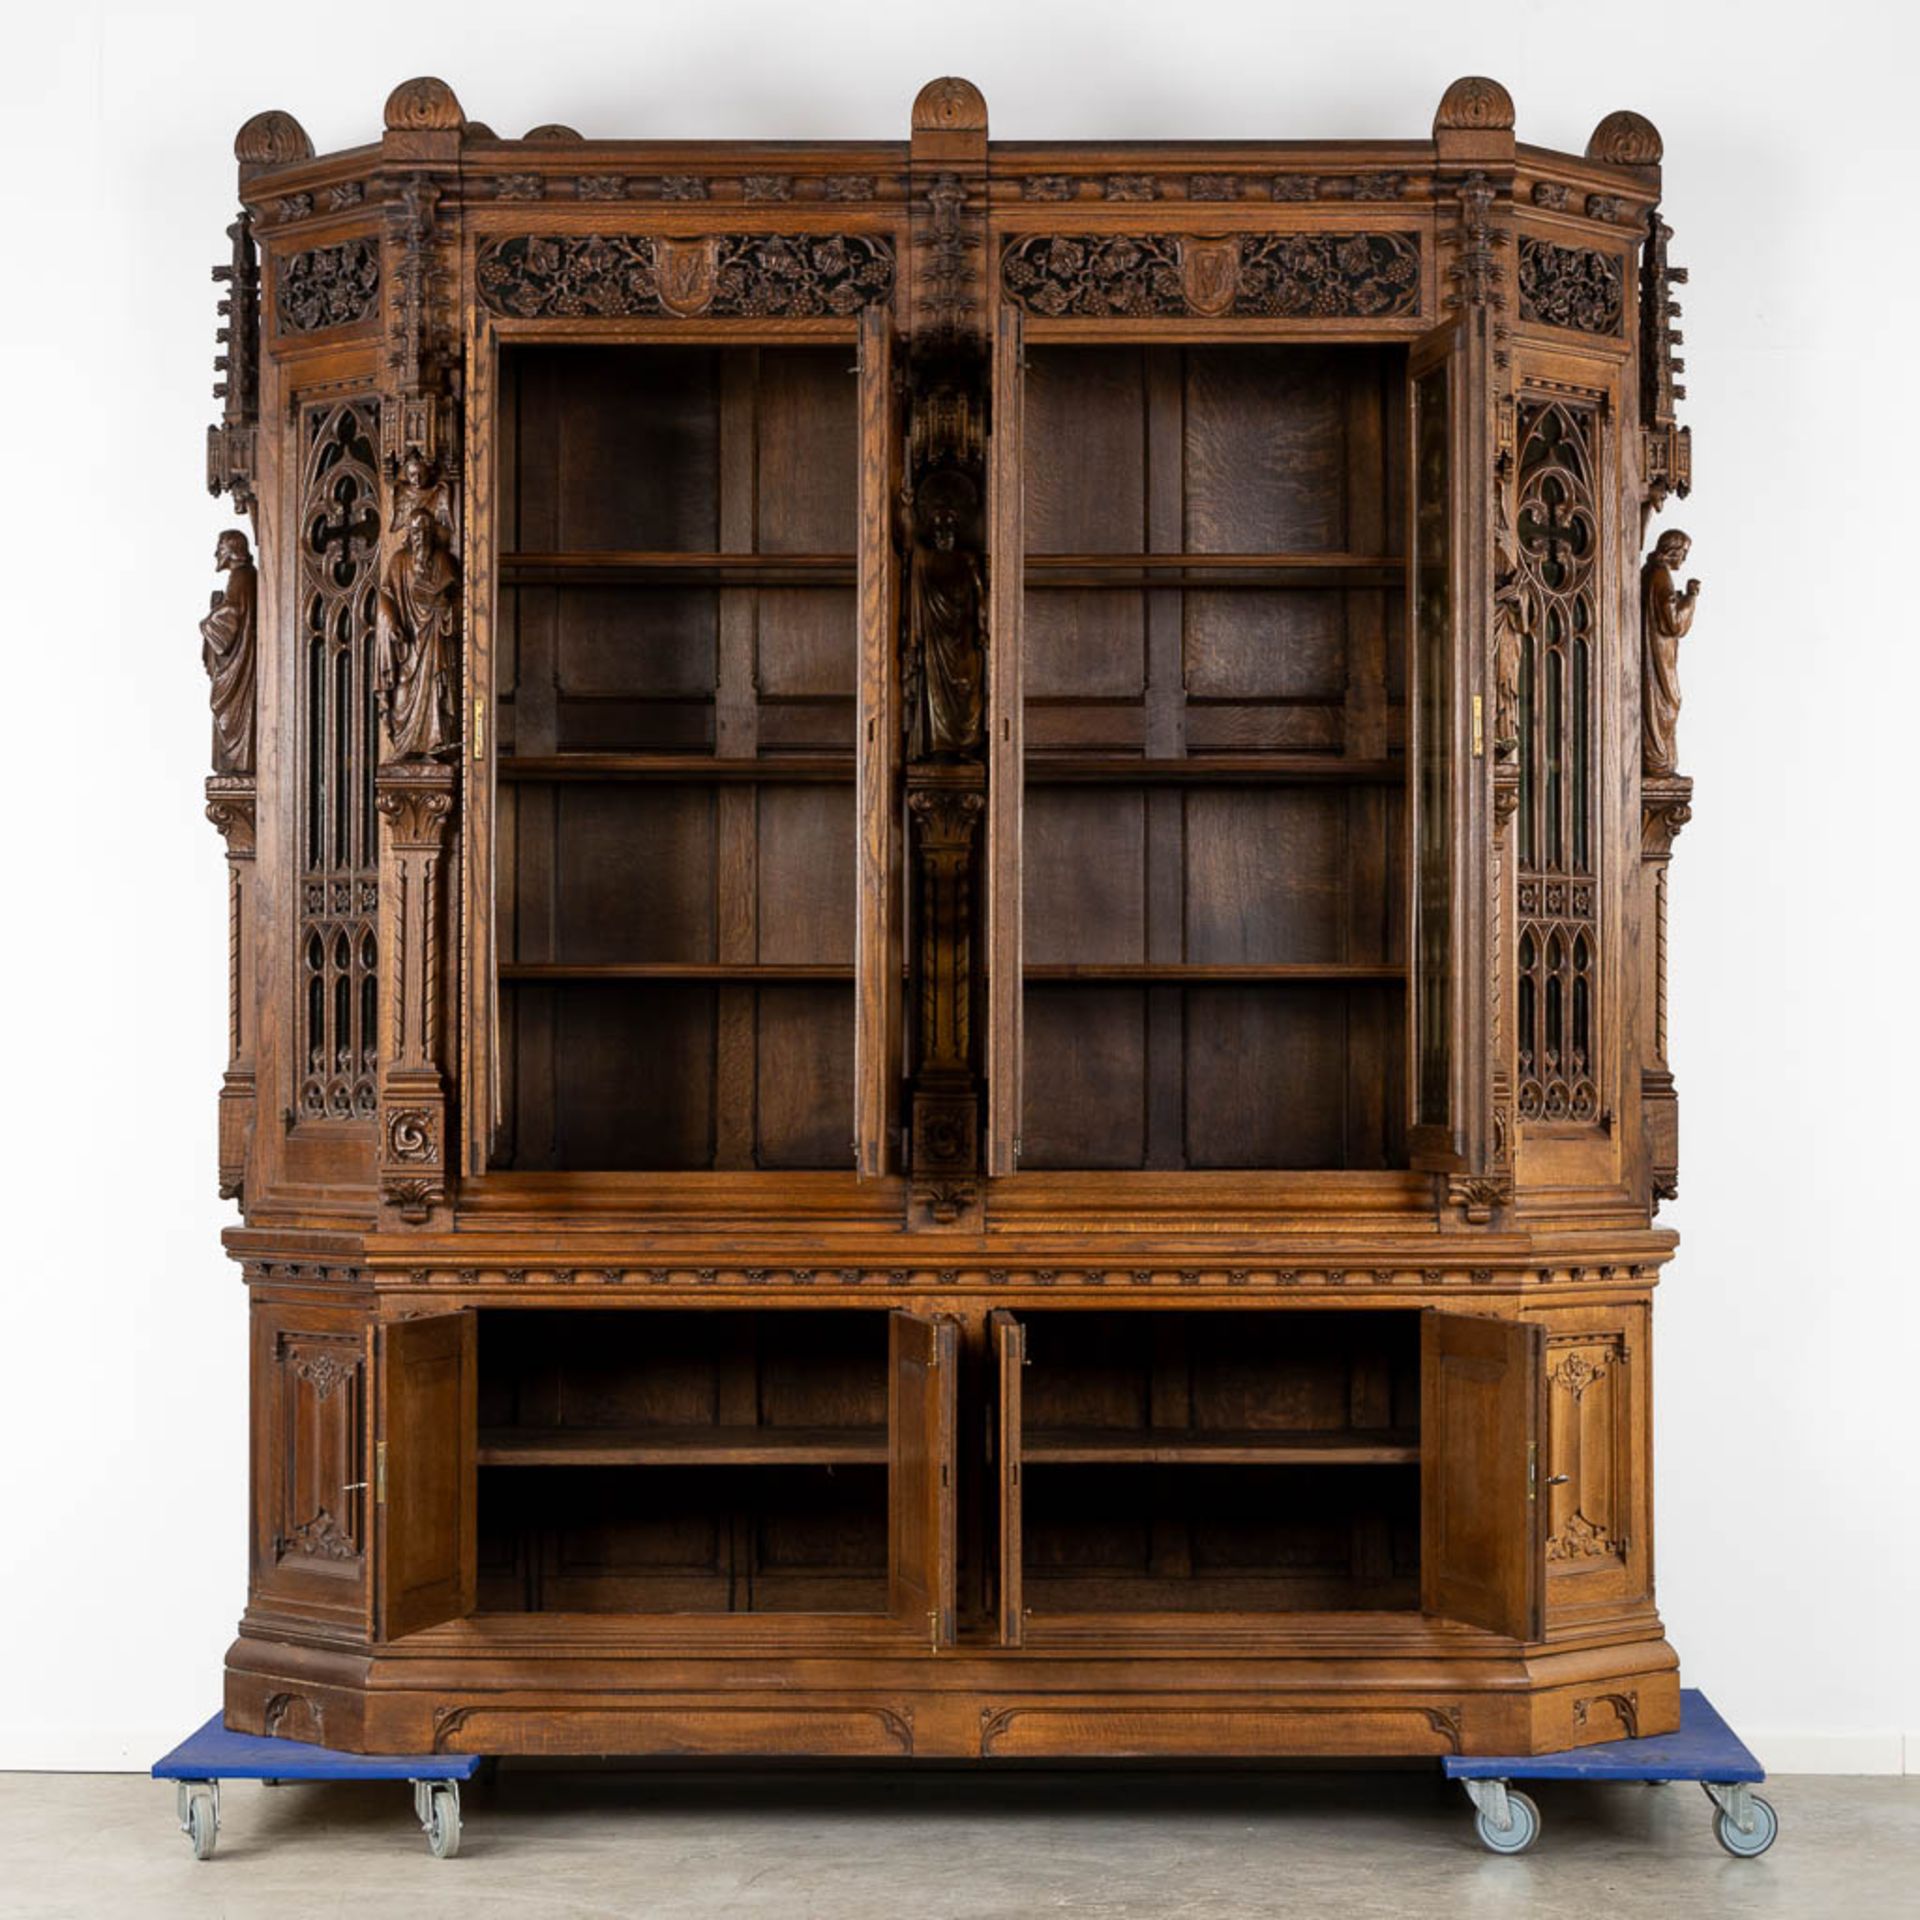 An exceptionally sculptured Gothic Revival library. Circa 1900. (L:62 x W:236 x H:264 cm) - Image 3 of 19